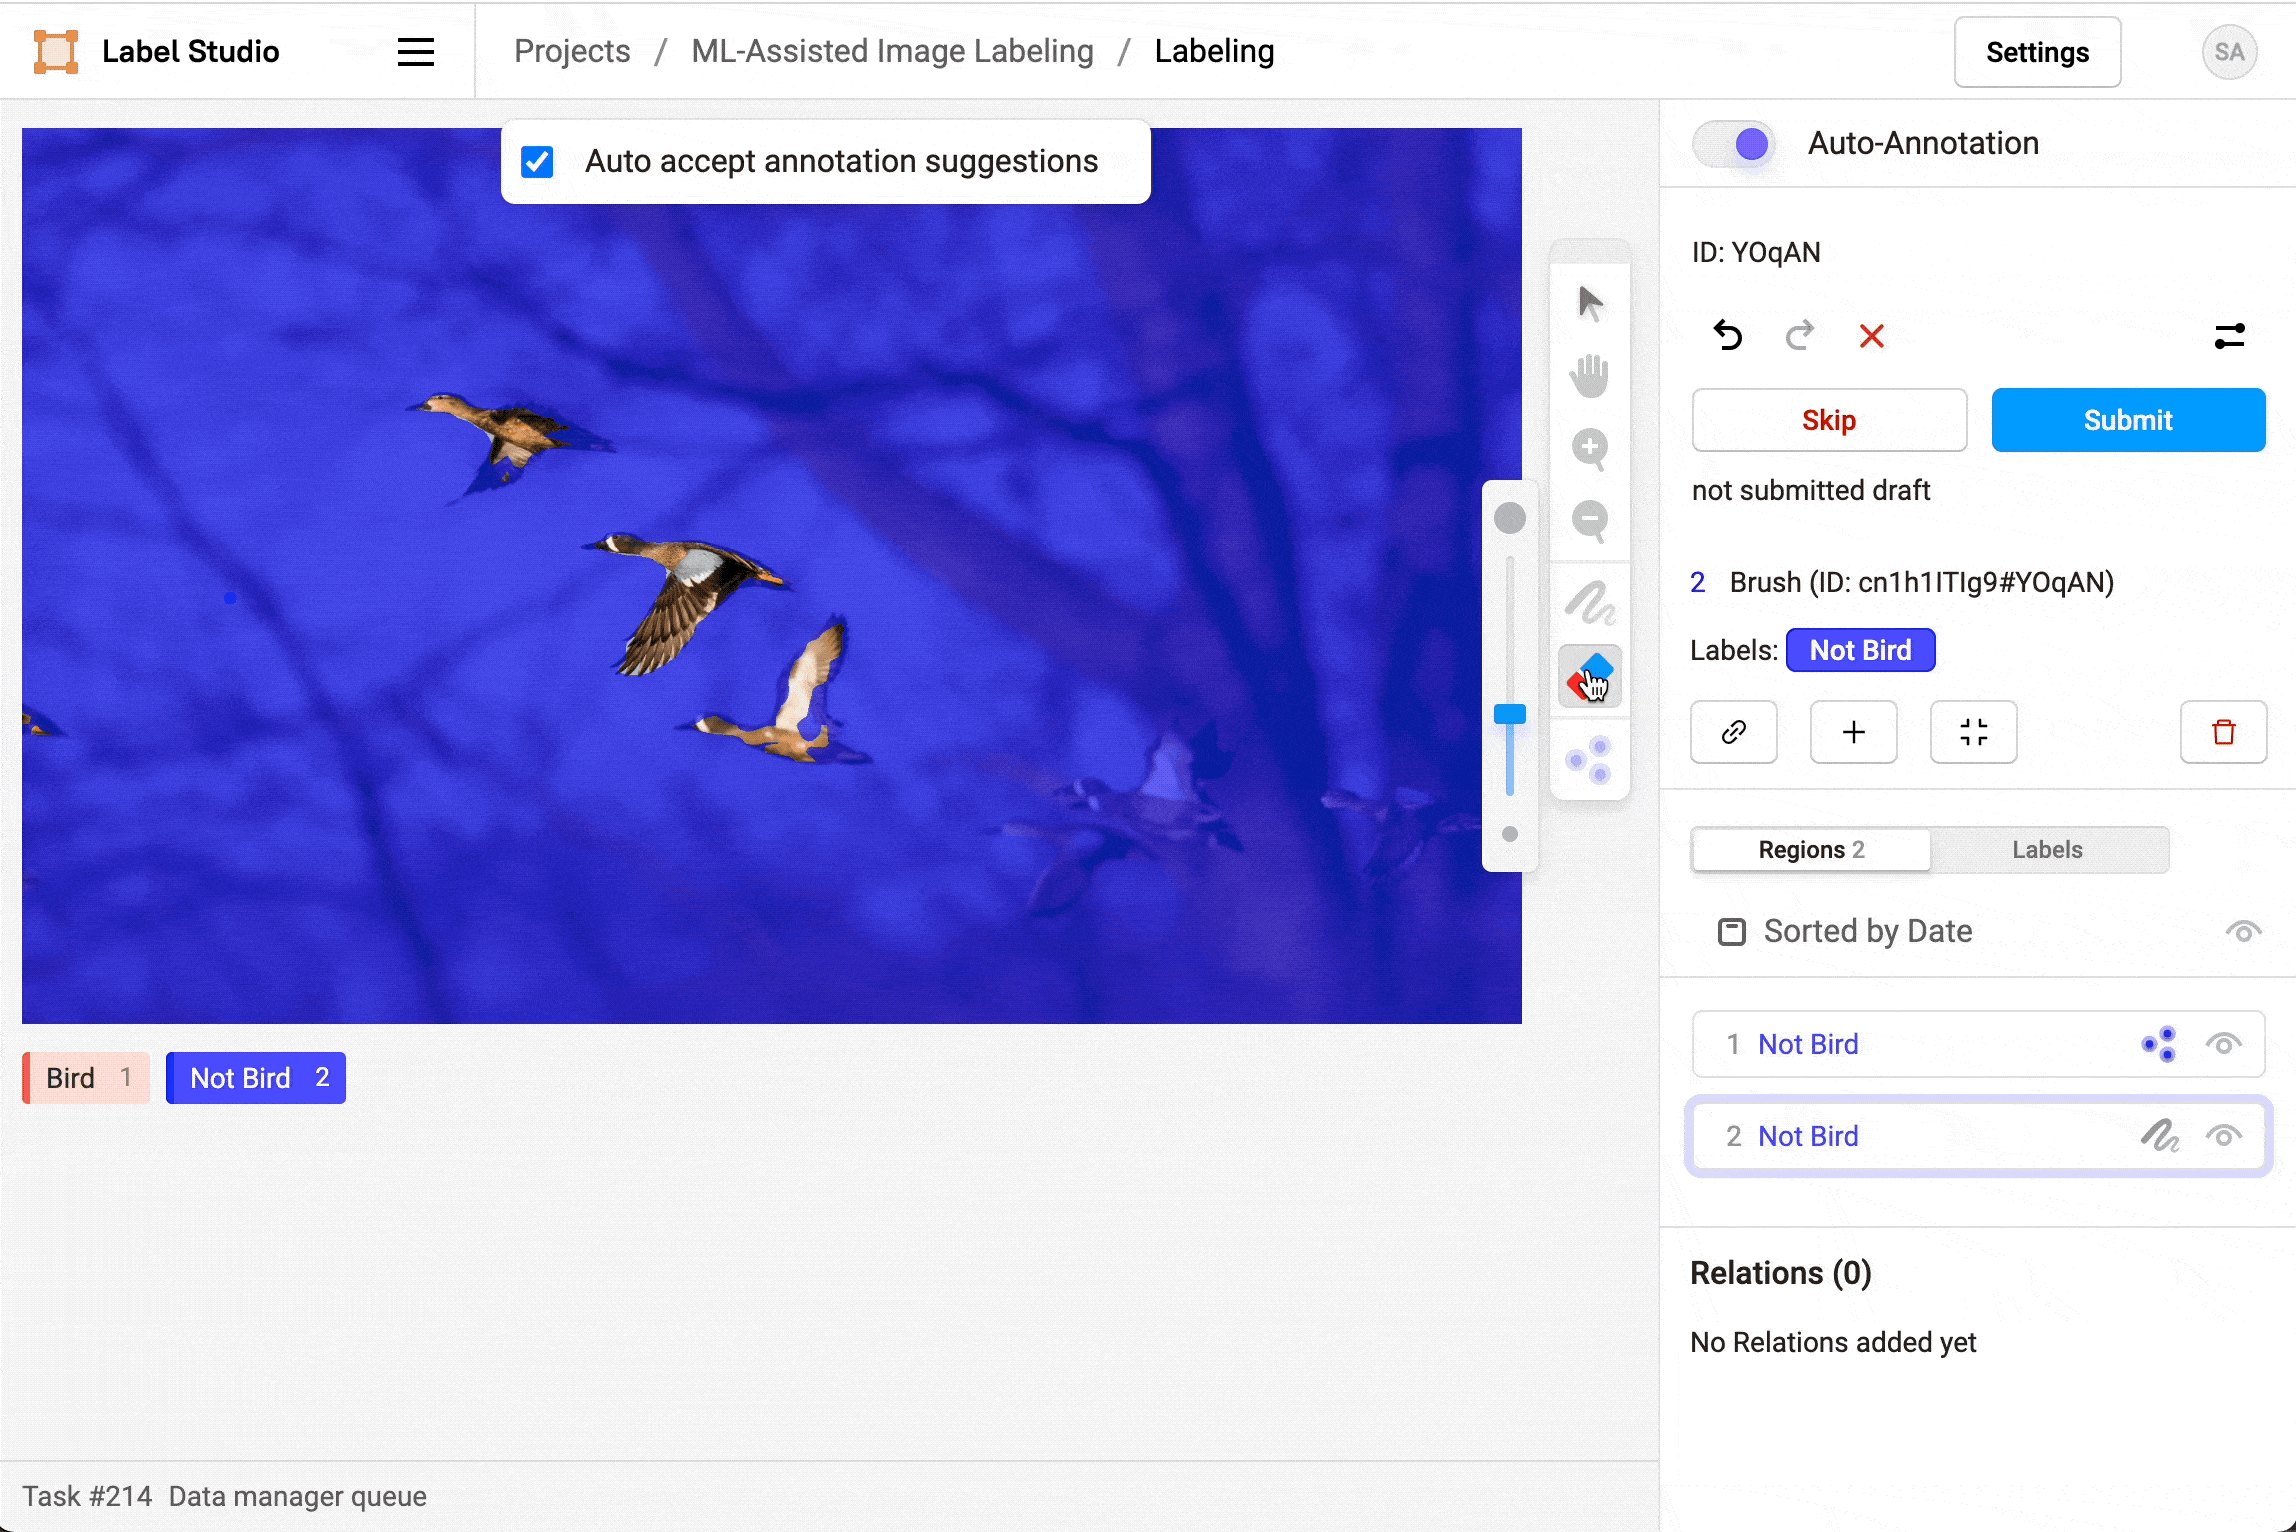 Gif of selecting a brush mask region, then selecting the eraser to erase the brush mask covering some flying geese that were covered by the brush mask region that was supposed to identify not birds, but missed some geese that were out of focus in the image.